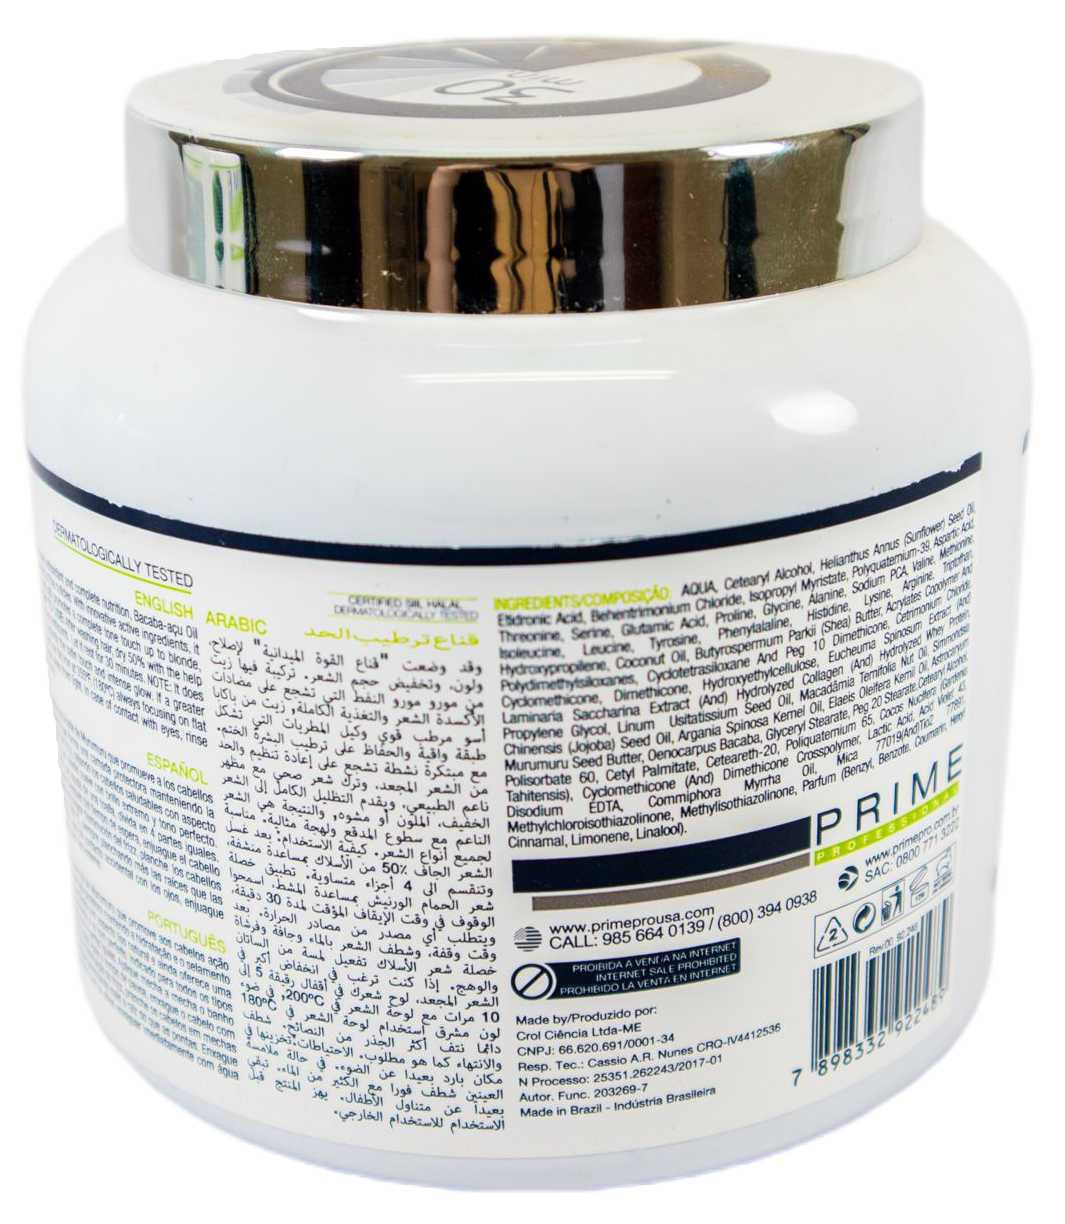 Prime Pro Extreme Hair Mask Bio Tanix Force Field Protein Reduce Hair Repair Mask 1kg - Prime Pro